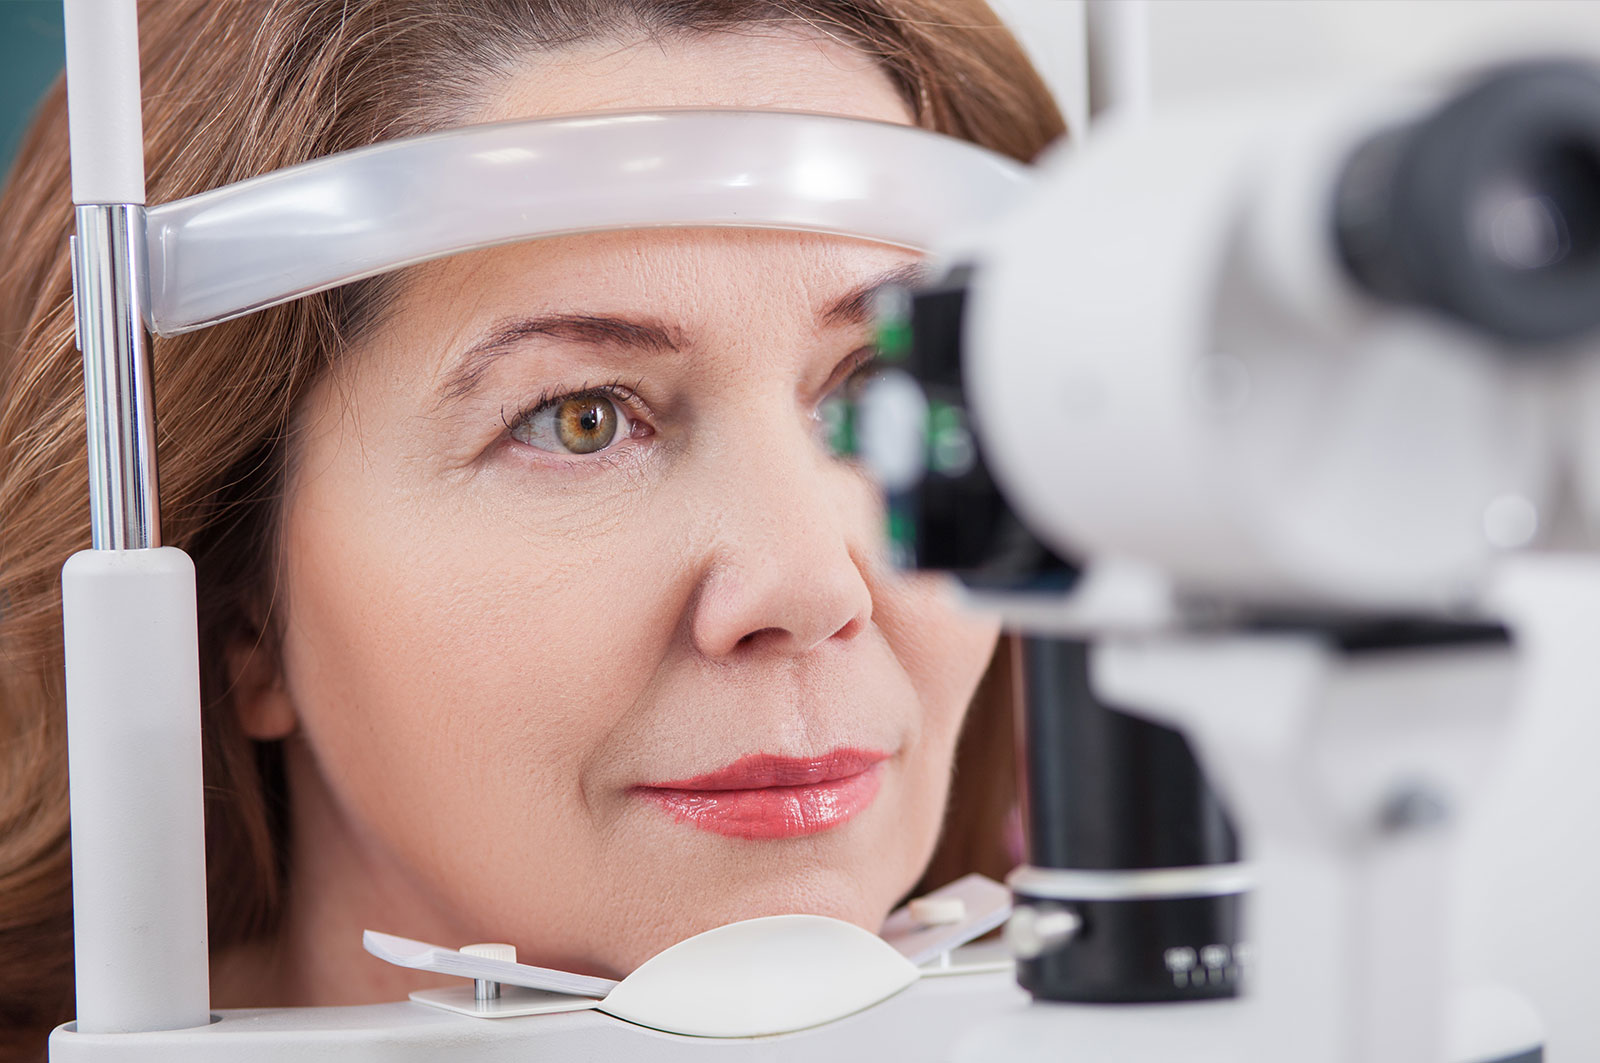 Clear Eye Care | Cataract Diagnosis   Management, Diabetic Eye Exams and Glaucoma Diagnosis   Management